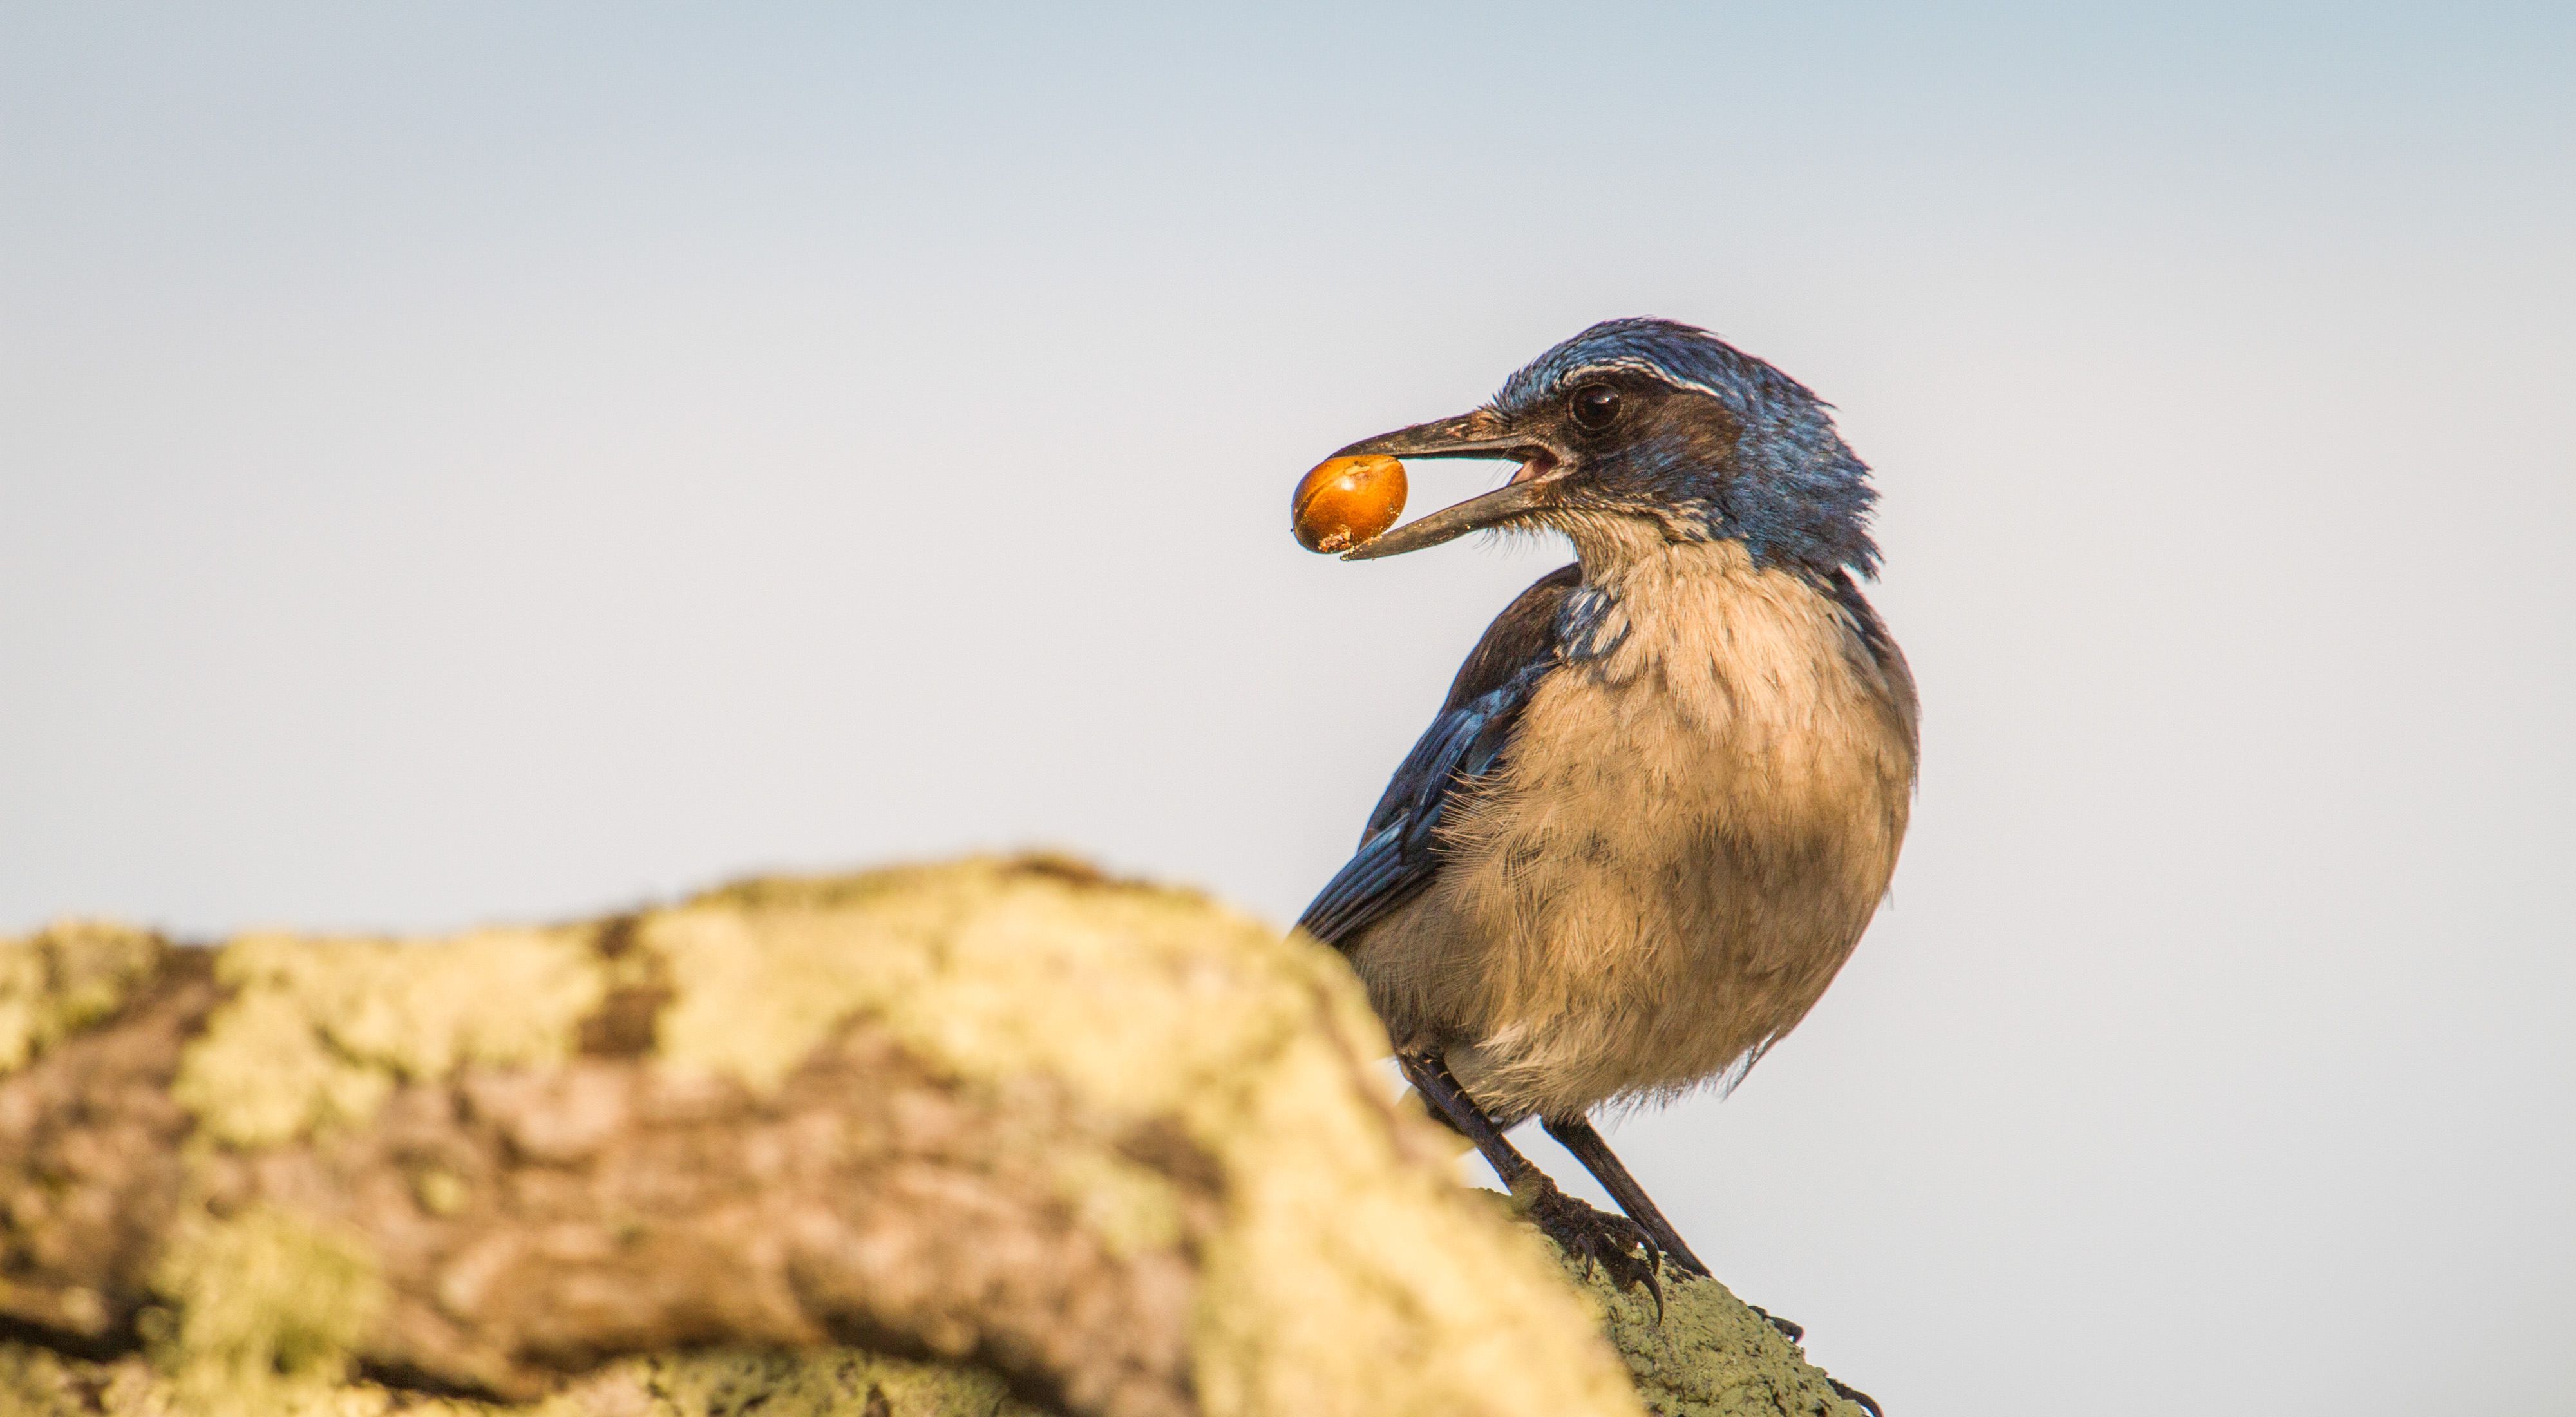 (ALL INTERNAL RIGHTS, LIMITED EXTERNAL RIGHTS) May 2016. An island scrub-jay (Aphelocoma insularis) takes native seeds that researchers have placed on an oak tree branch. Island scrub-jays are considered ecosystem engineers and play a large role in shaping the environment. Jays cache large seeds to store them for later, and in so doing help disperse oak and pine trees into new areas.  If jays were reintroduced to Santa Rosa Island, they could help restore oak and pine habitat that is currently very limited and degraded. Photo credit: © Morgan Heim/Day's End Productions 